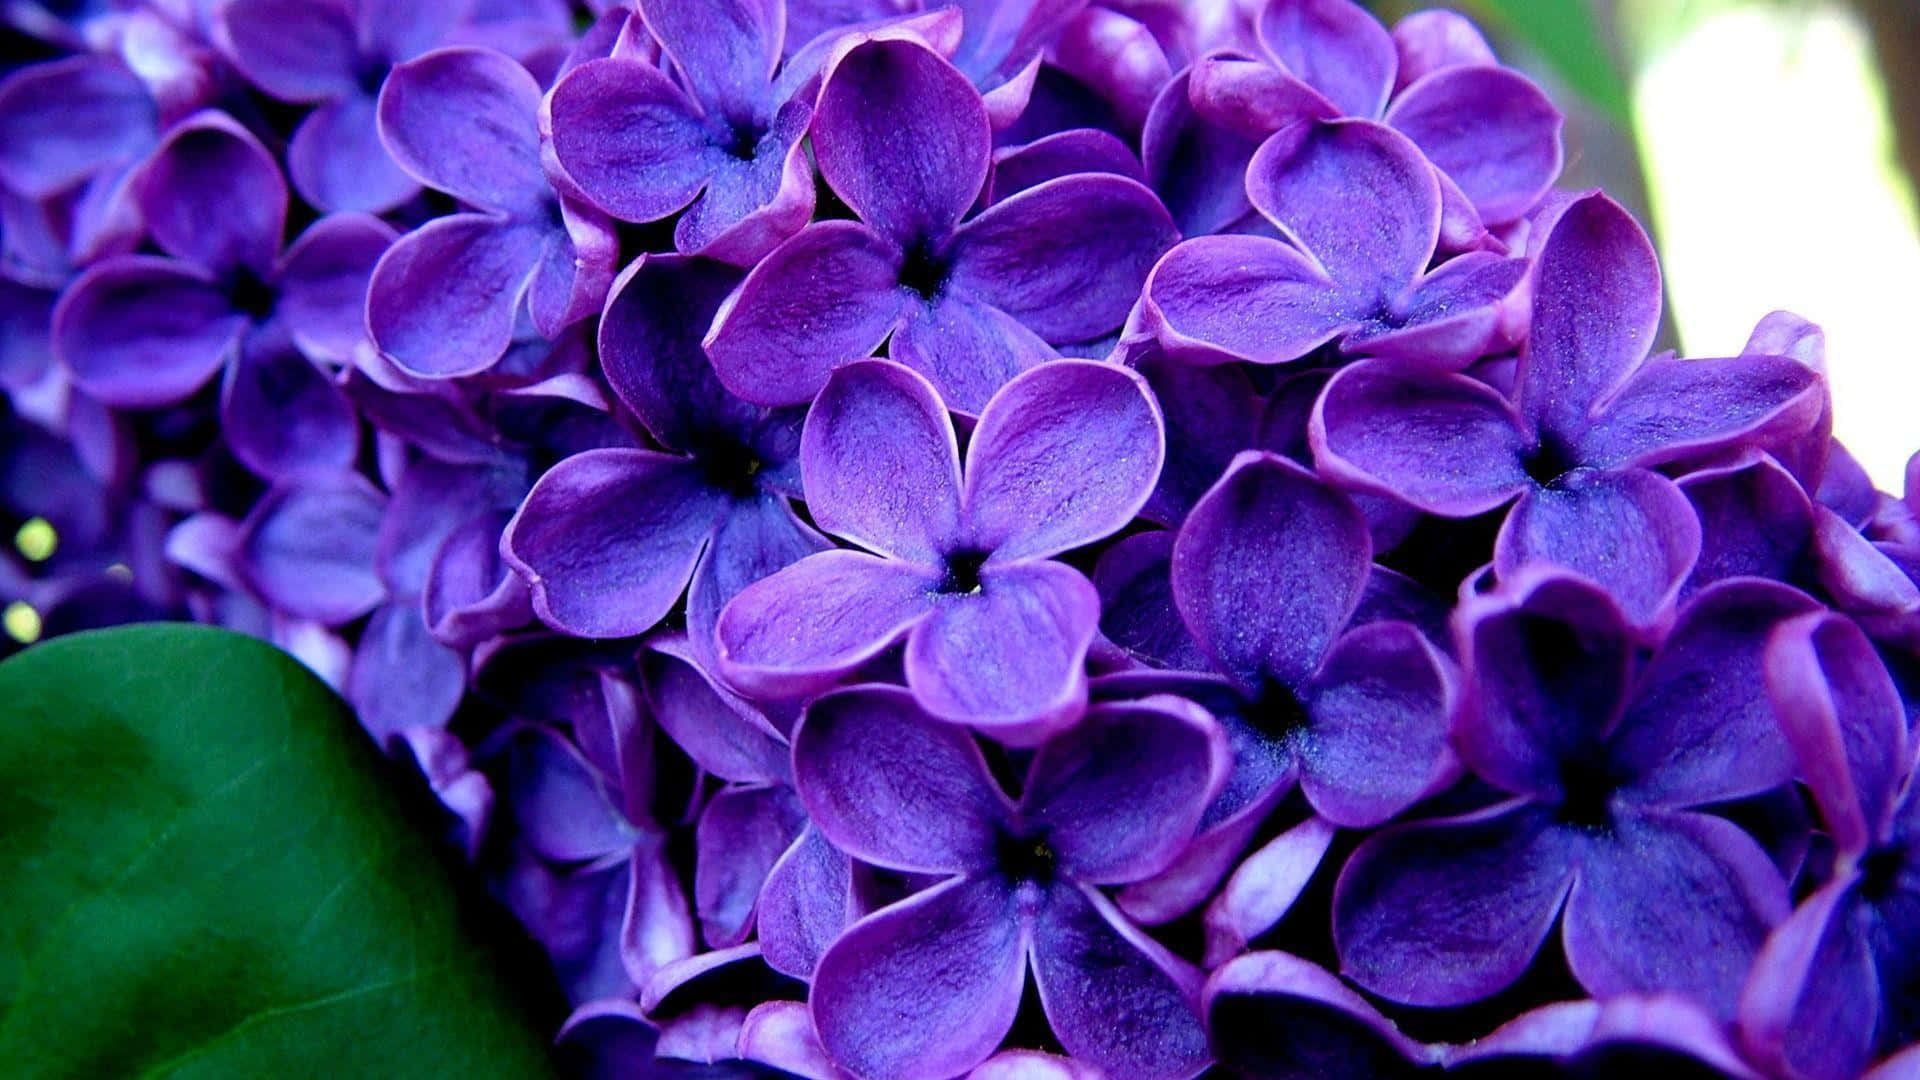 A beautiful and fragrant purple flower